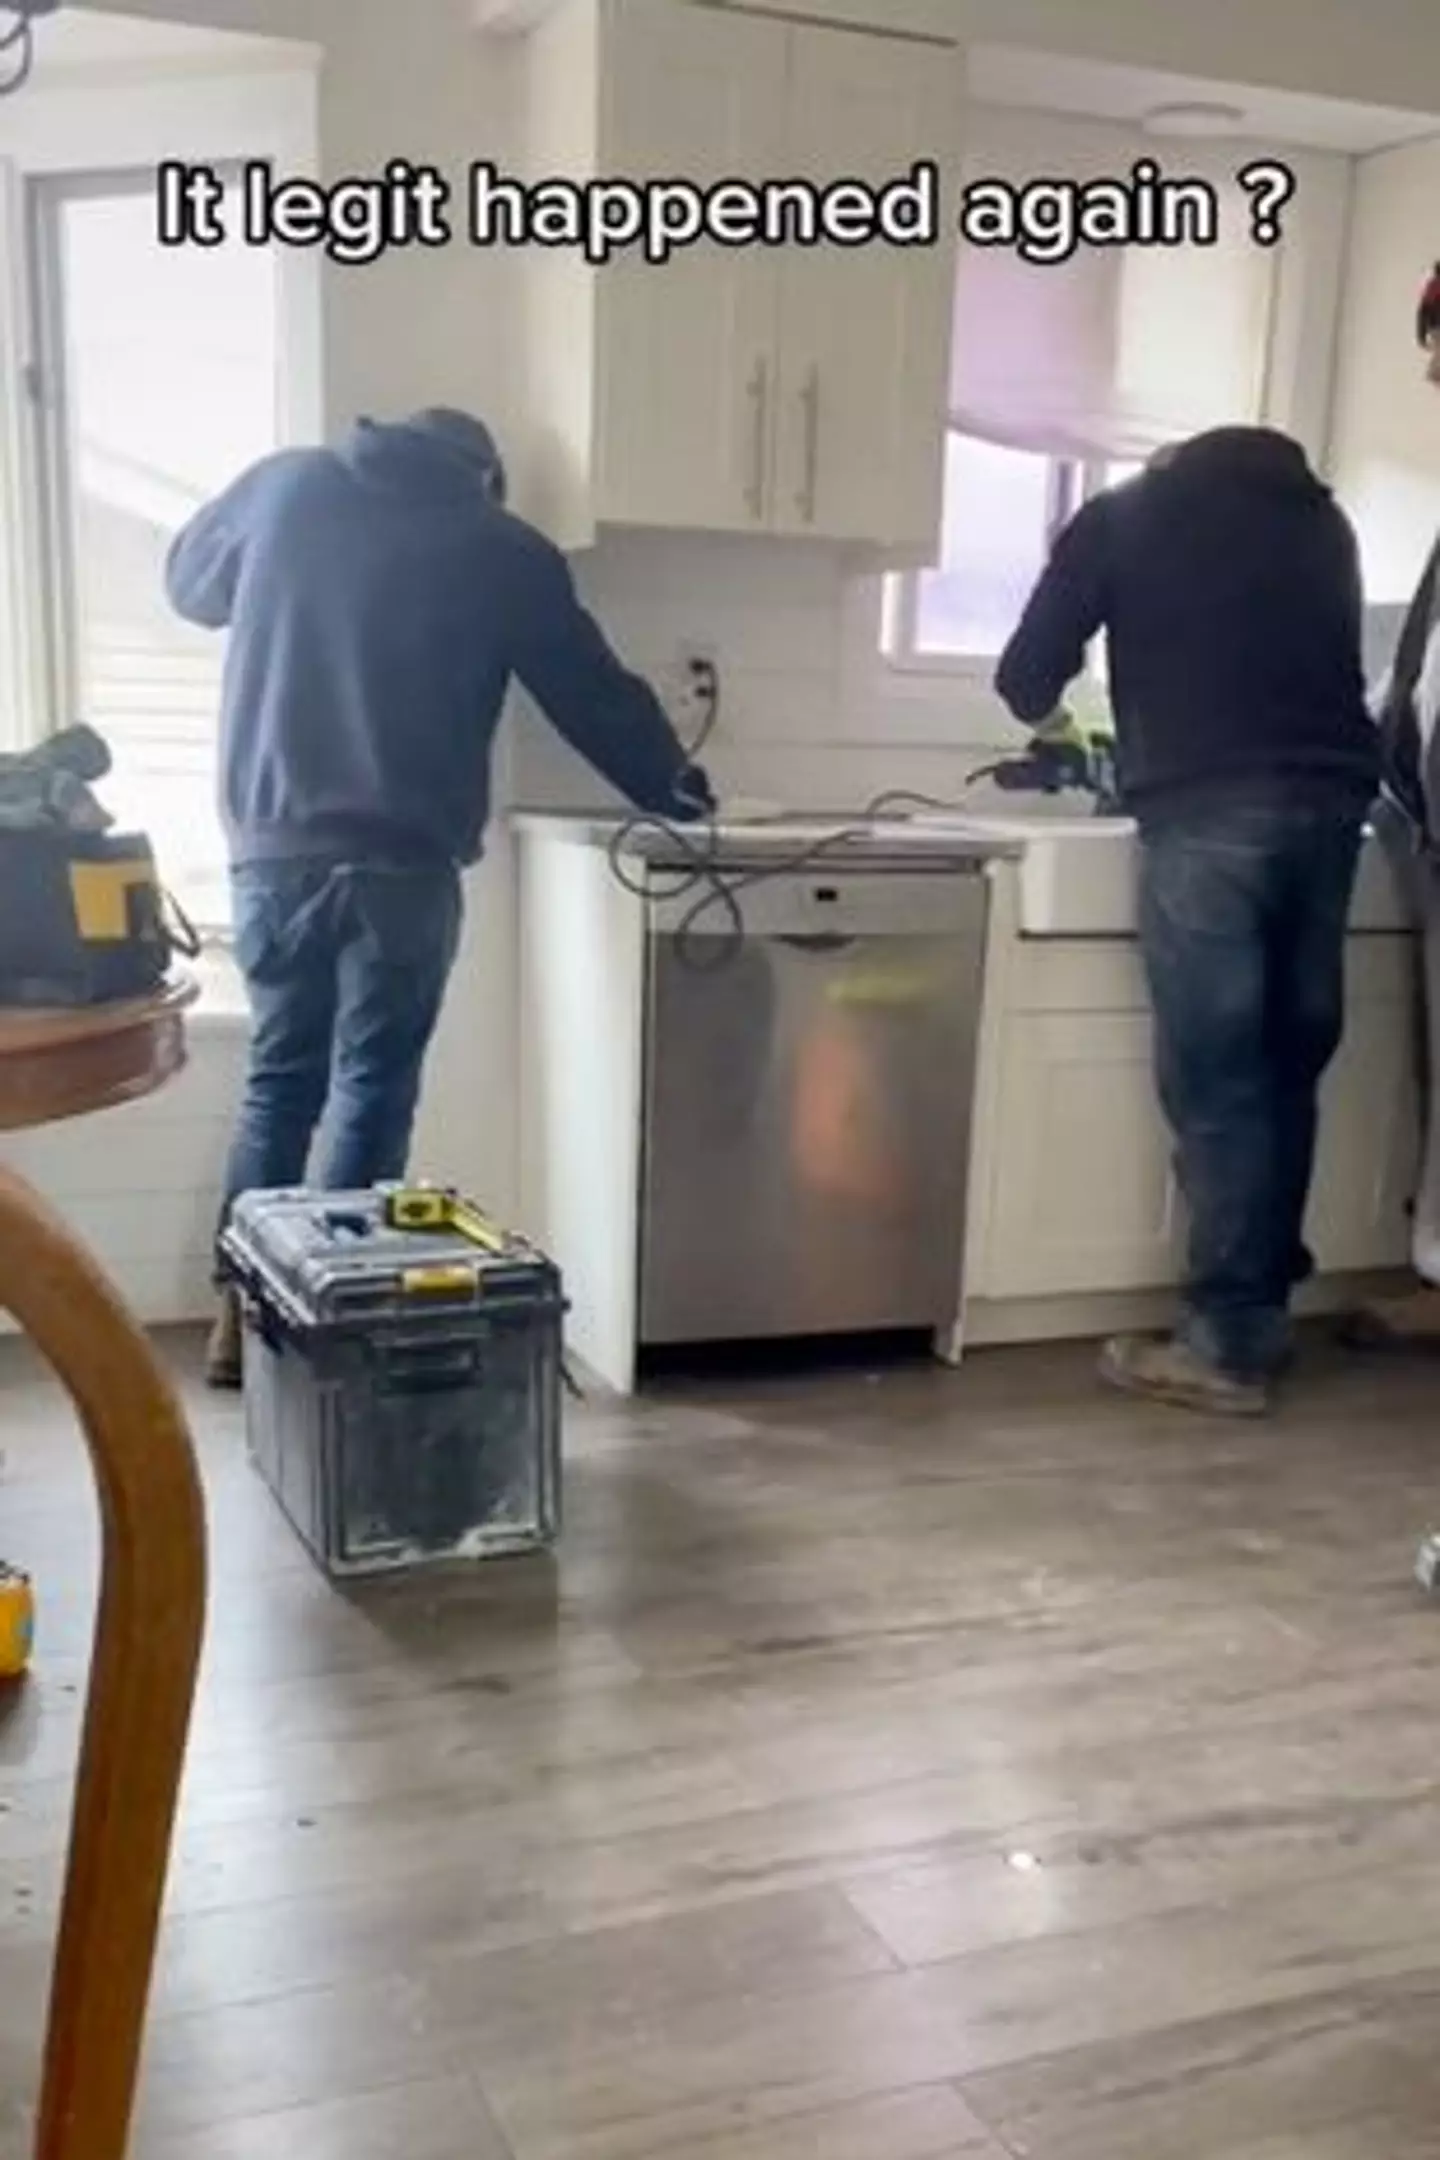 Chloe Fountain was baffled at how the same 'mistake' had happened again as she recently came home to a group of builders doing renovations in her kitchen, unannounced.